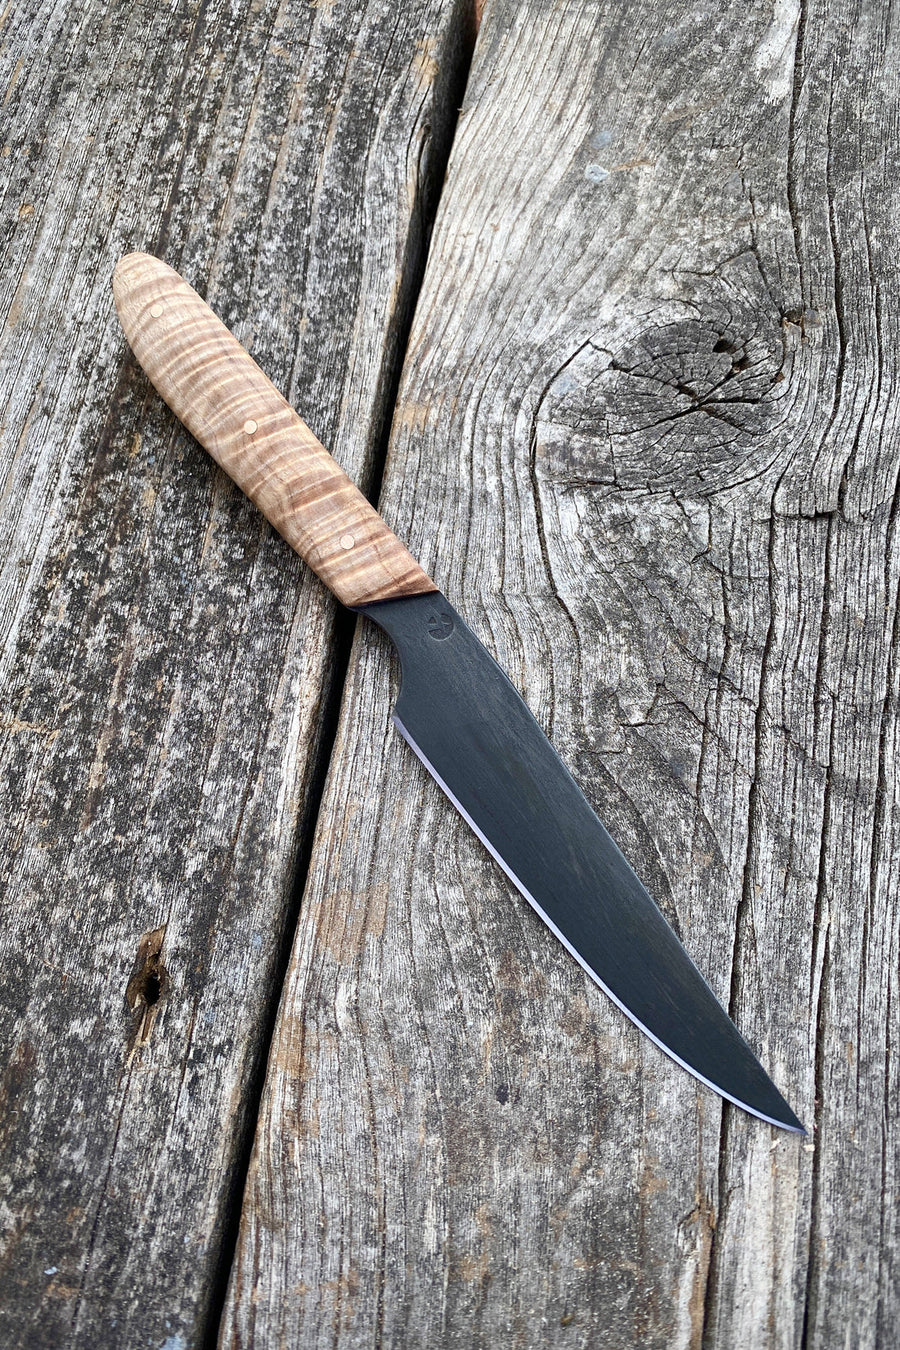 Redroot Blades -- Handmade carbon steel paring knife. USA made. 